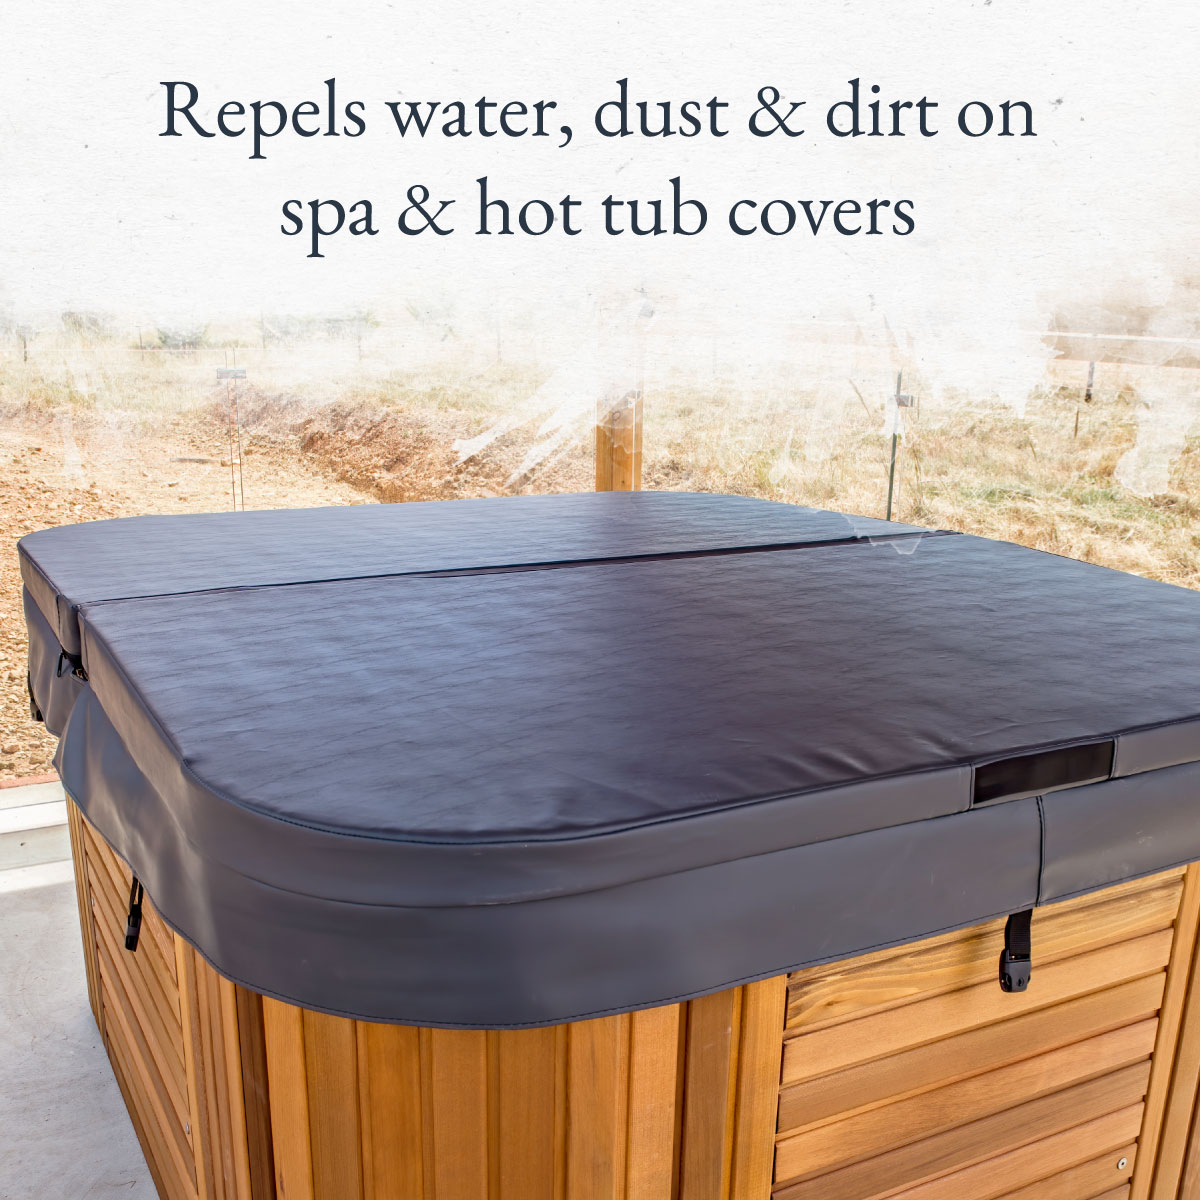 Repels water, dust & dirt on spa & hot tub covers